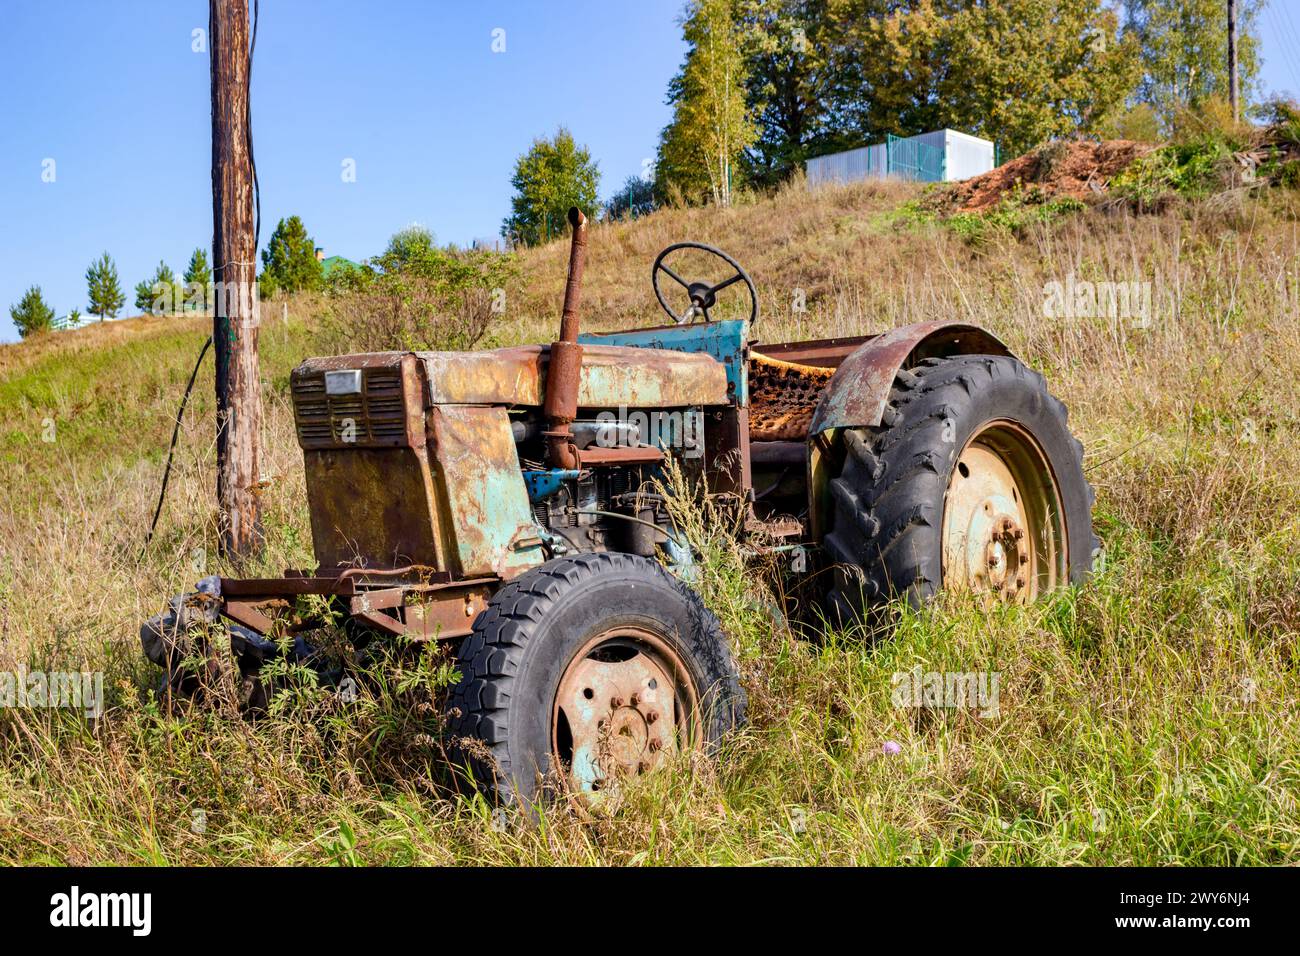 Old Soviet tractor LTZ - Lipetsk tractor plant. Farm in the countryside: Malomakhovo, Russia - September 2018 Stock Photo